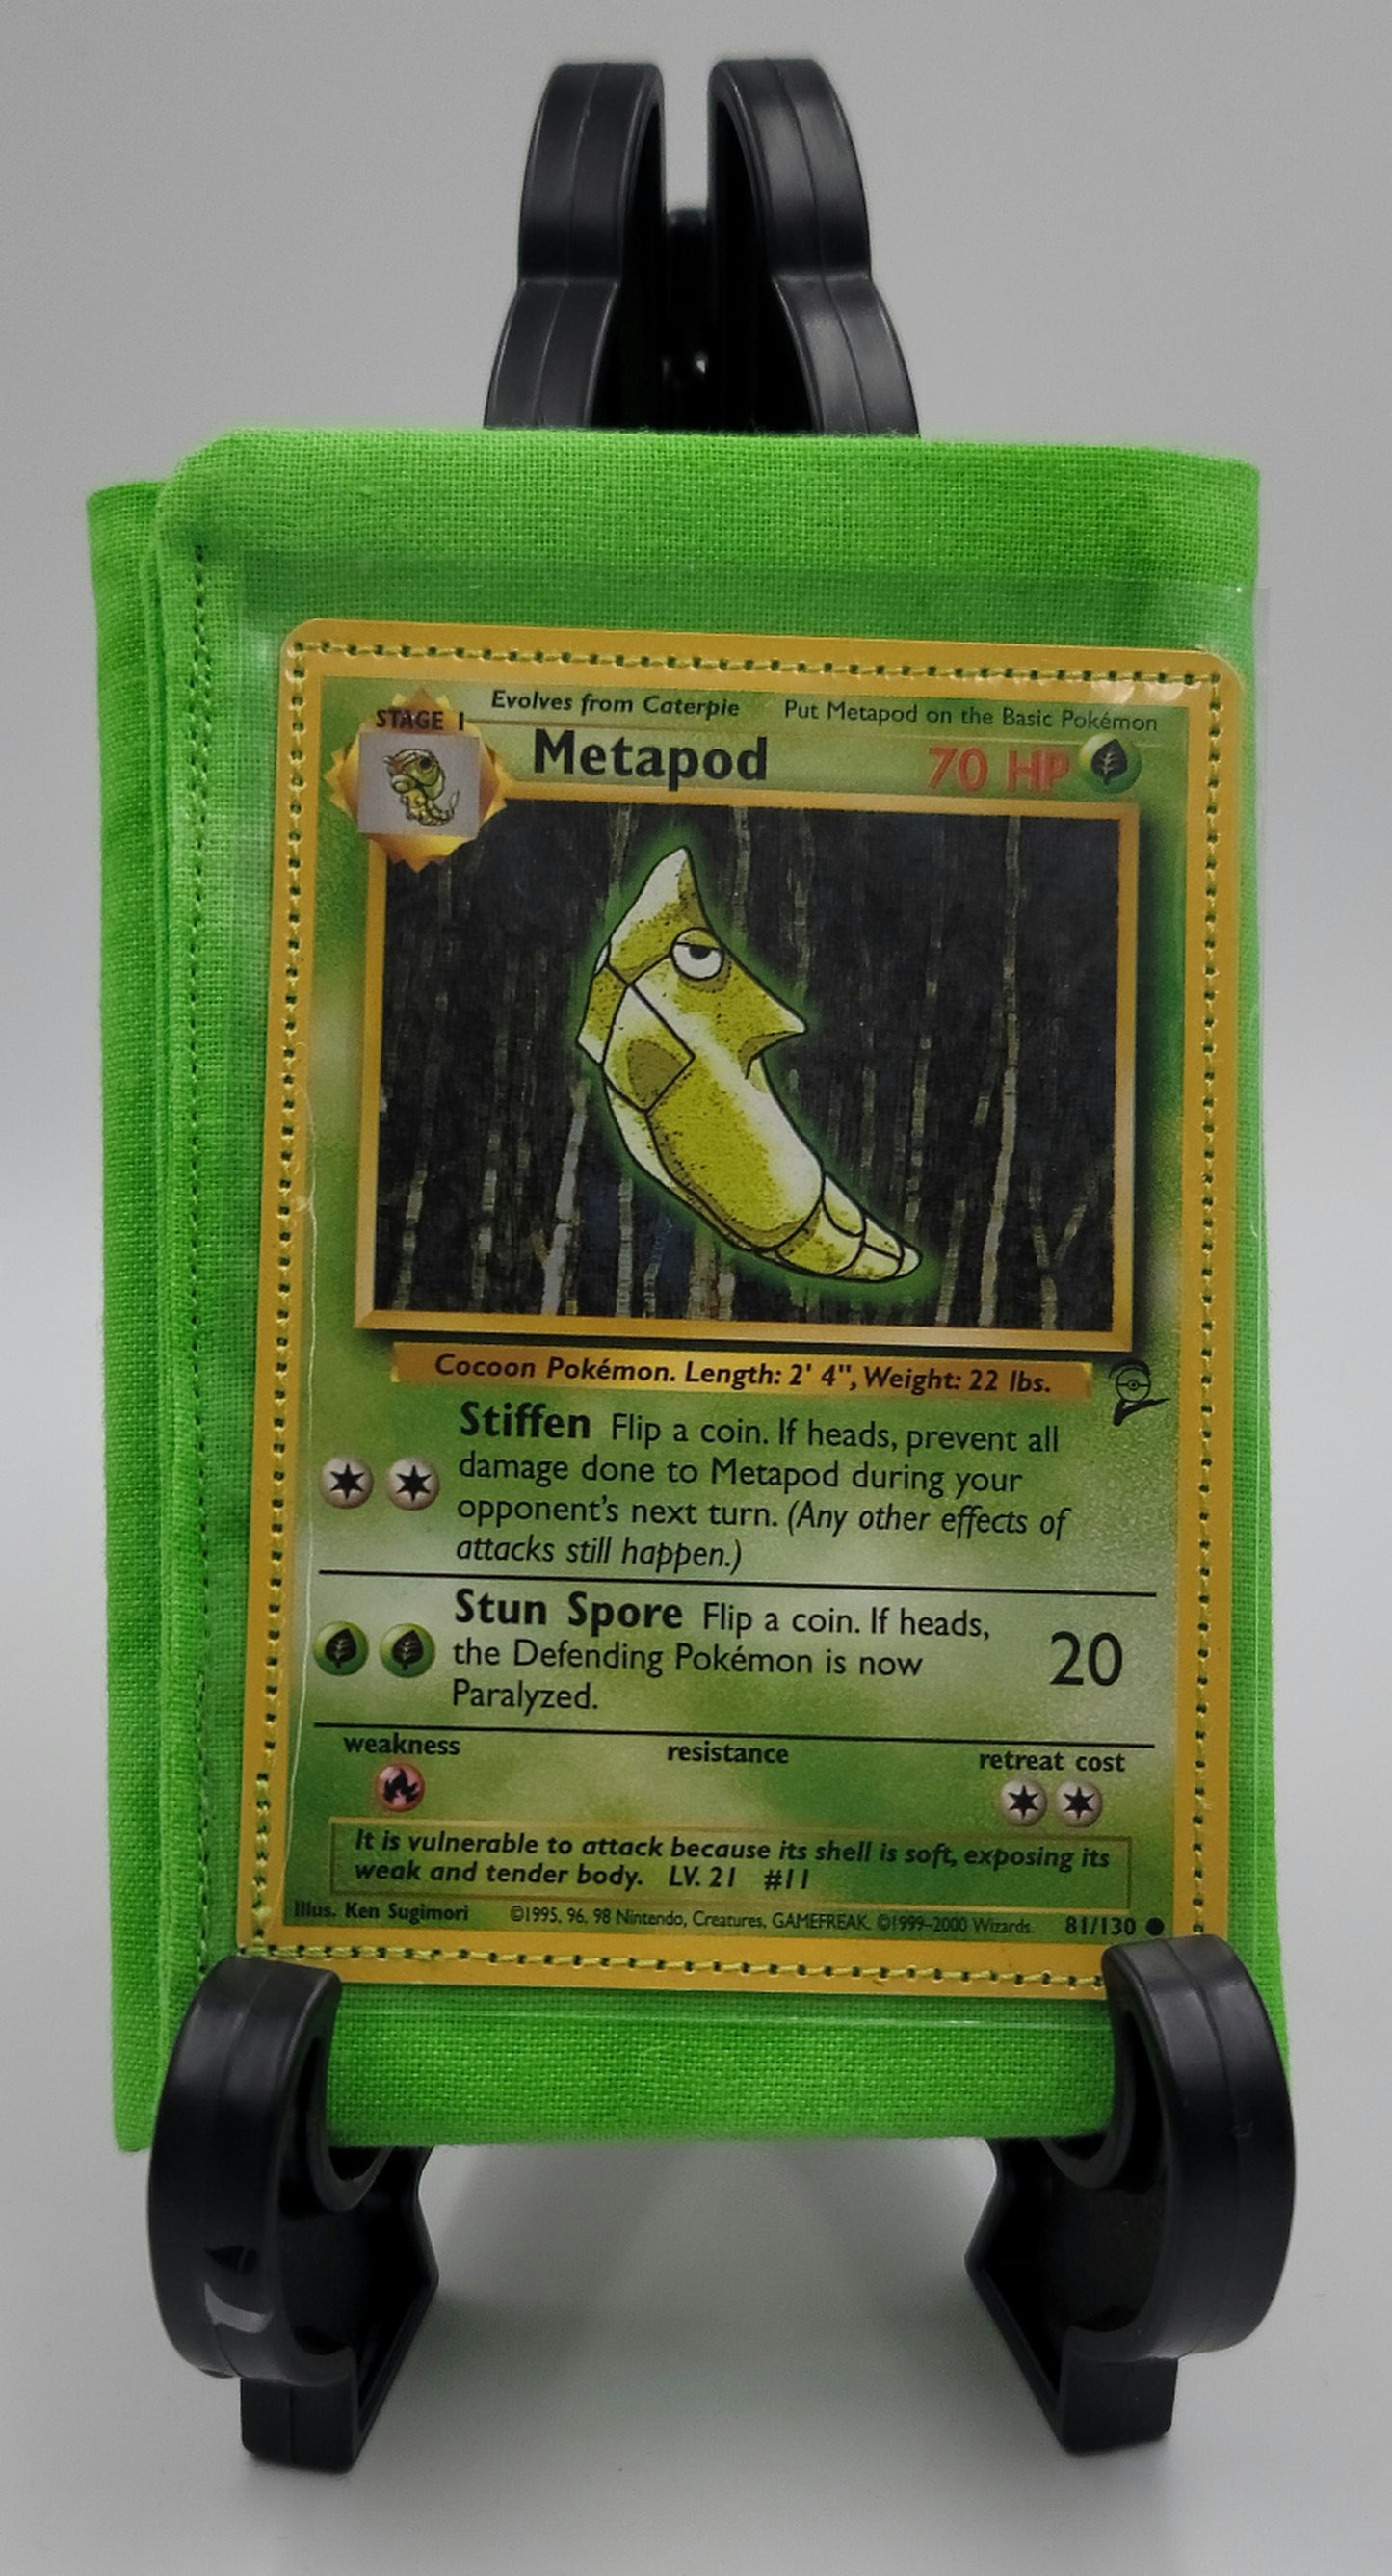 Handmade Caterpie and Metapod Pokemon card cloth wallet